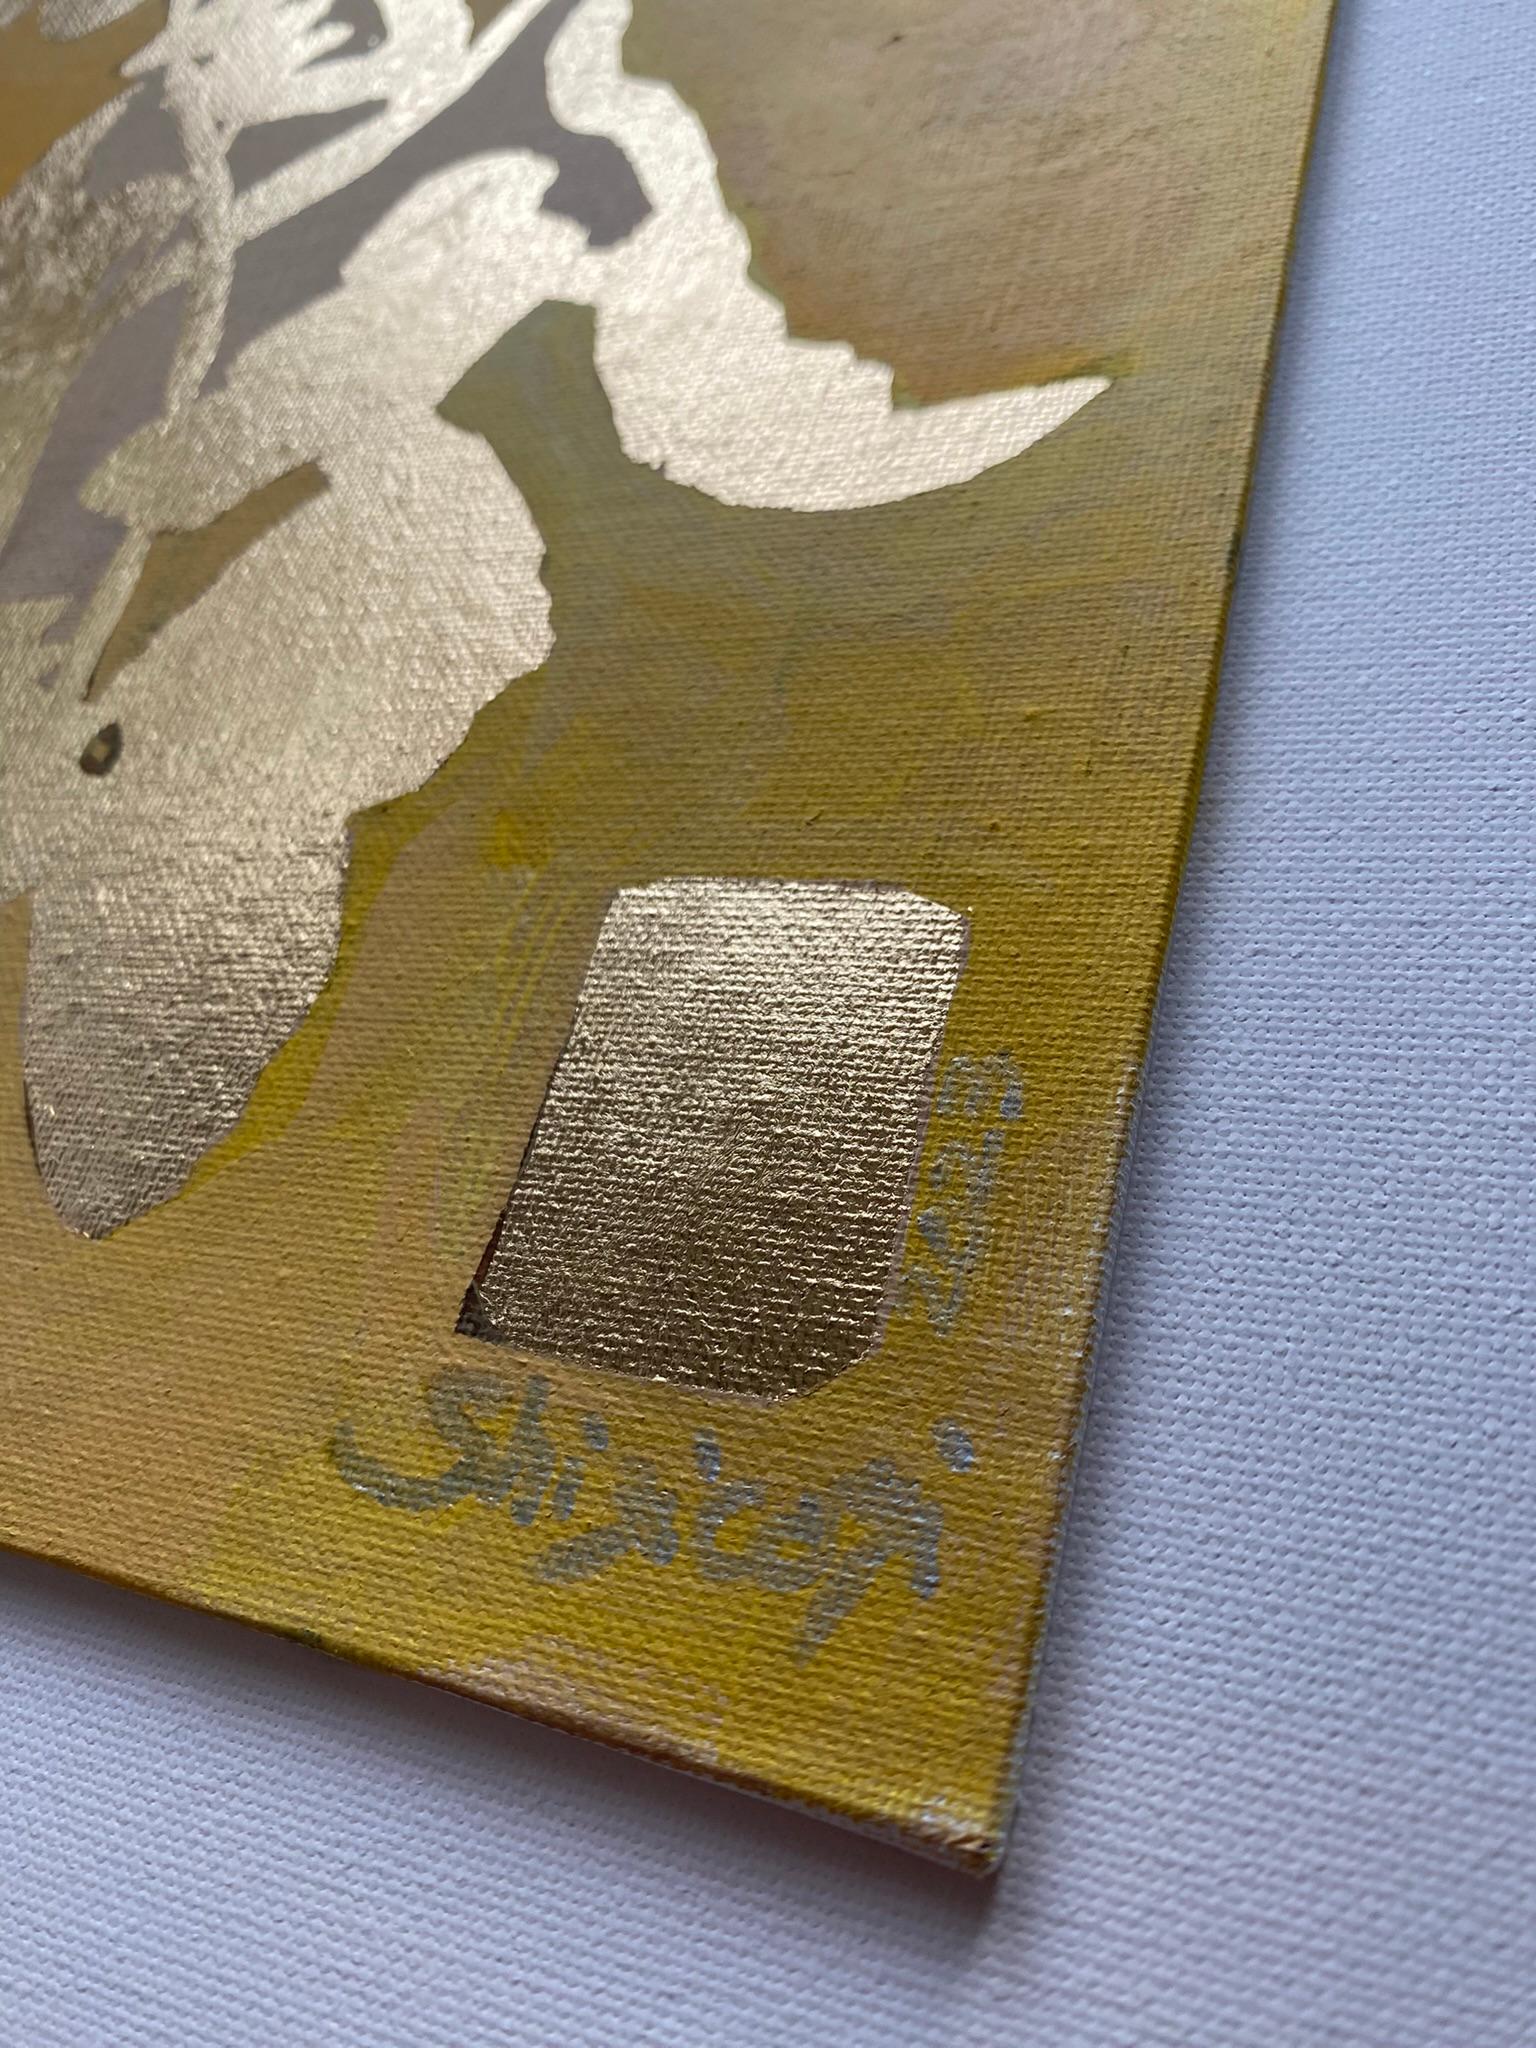 Original-Primary Yellow-Sunlit-Abstract-Expression-Gold Leaf-UK Awarded Artist 1